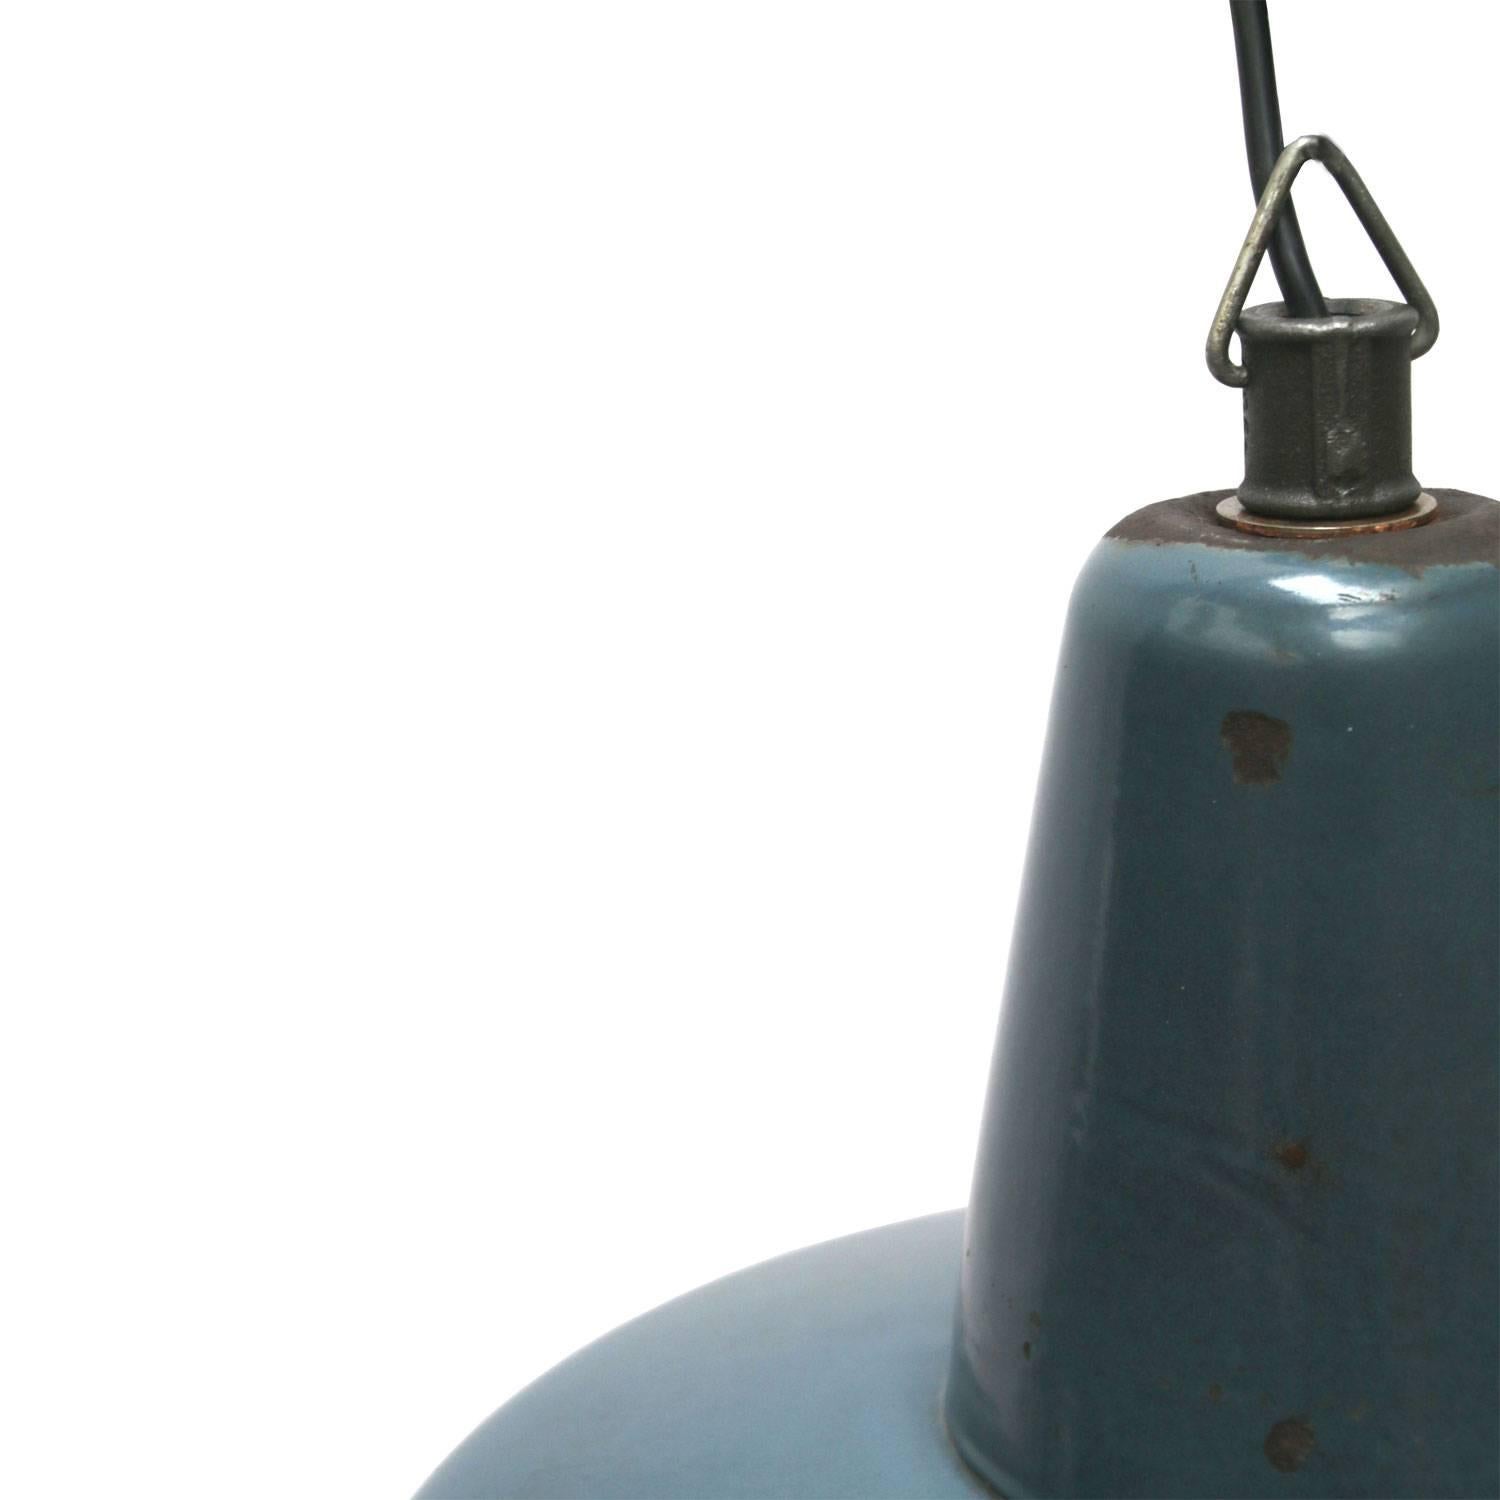 Blue enamel Industrial pendant. White interior.

Weight: 2.0 kg / 4.4 lb

All lamps have been made suitable by international standards for incandescent light bulbs, energy-efficient and LED bulbs. E26/E27 bulb holders and new wiring are CE certified